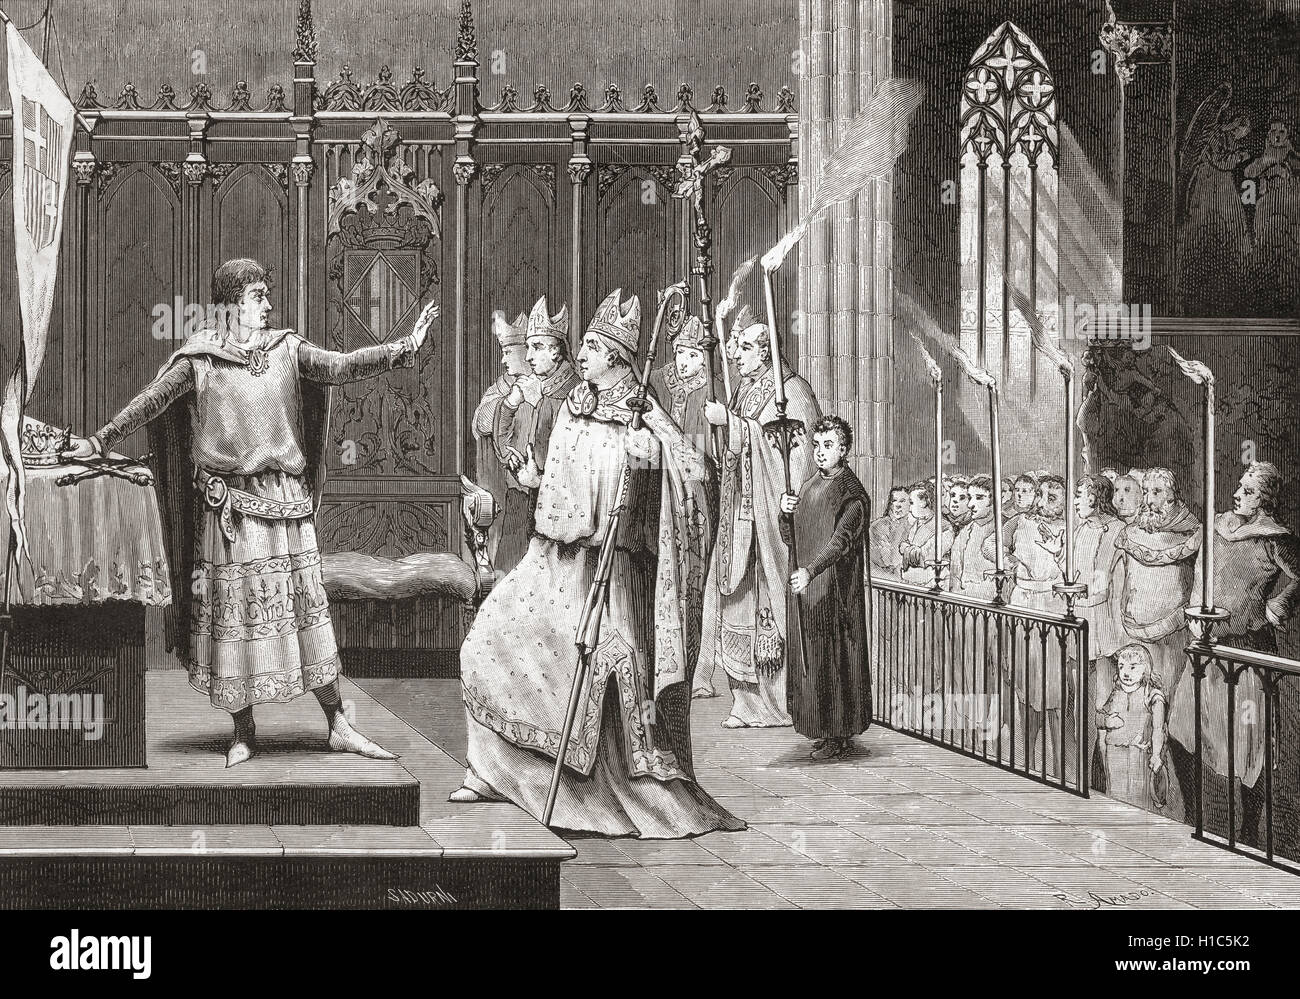 The coronation of Peter IV as King of Aragon in 1336.   Peter IV, 1319 – 1387.  King of Aragon, King of Sardinia and Corsica as Peter I, King of Valencia as Peter II, and Count of Barcelona and the rest of the Principality of Catalonia as Peter III. Stock Photo